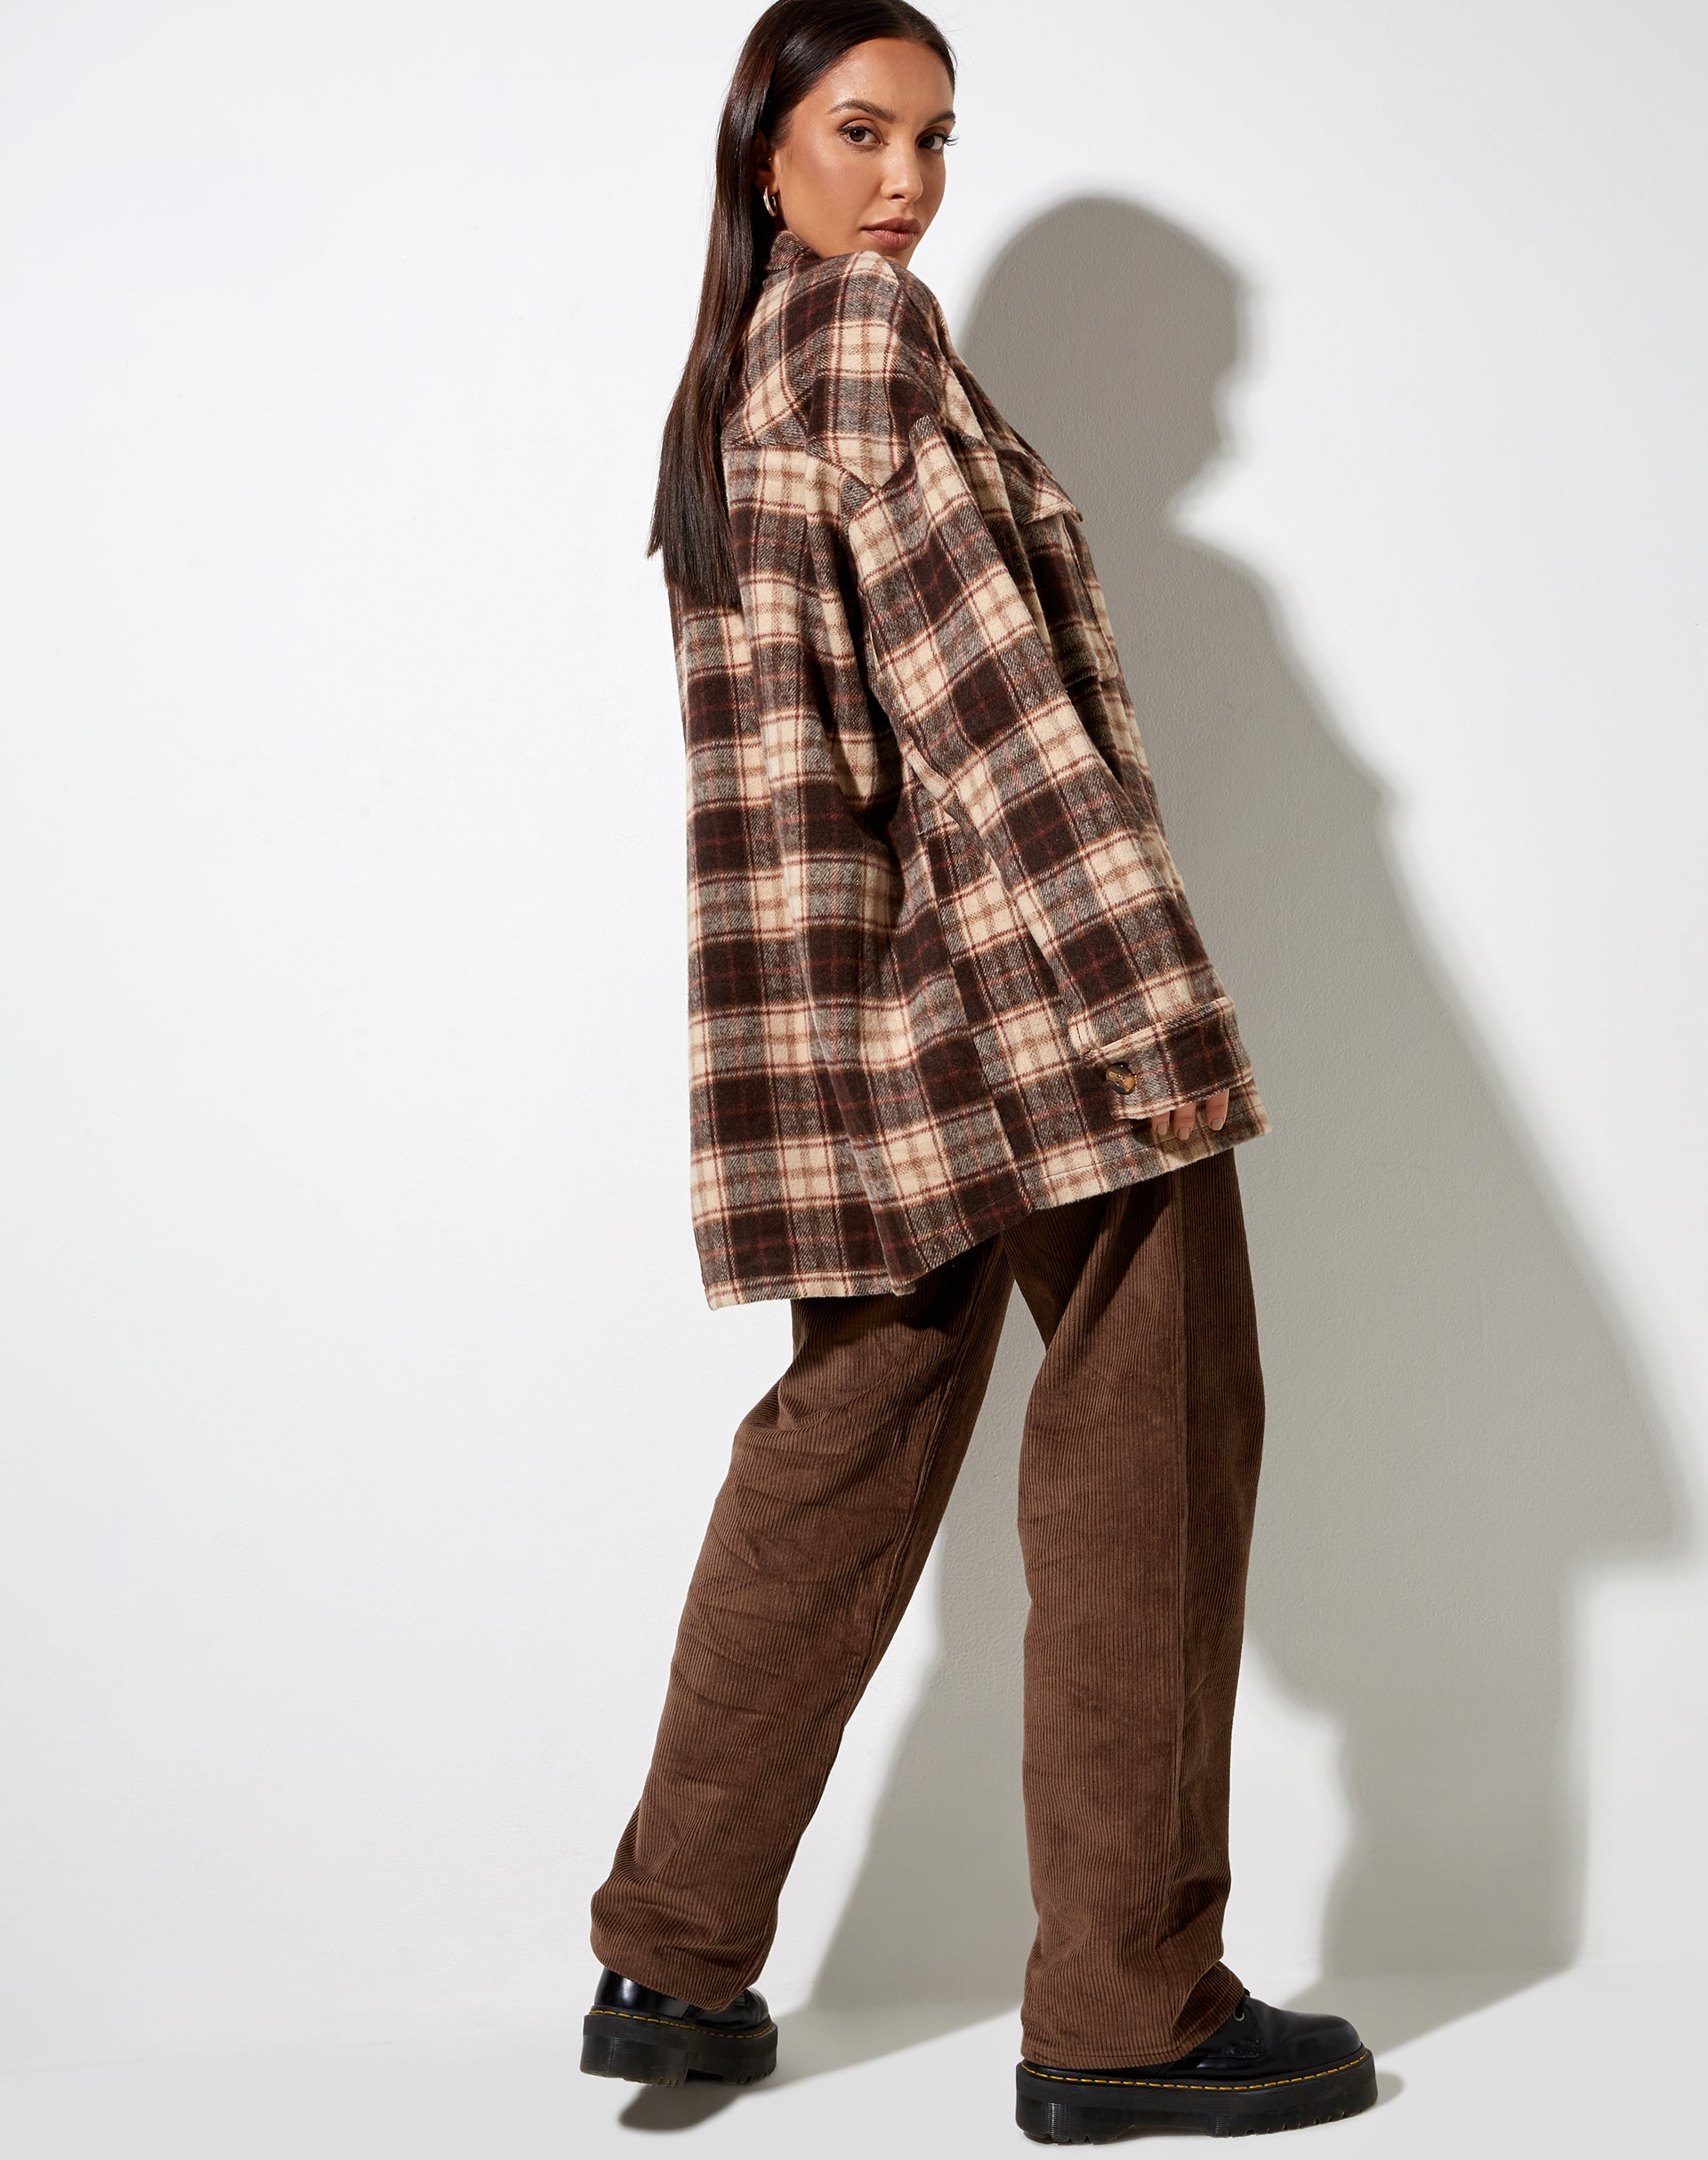 Image of Marcella Shirt in Brown and Cream Check